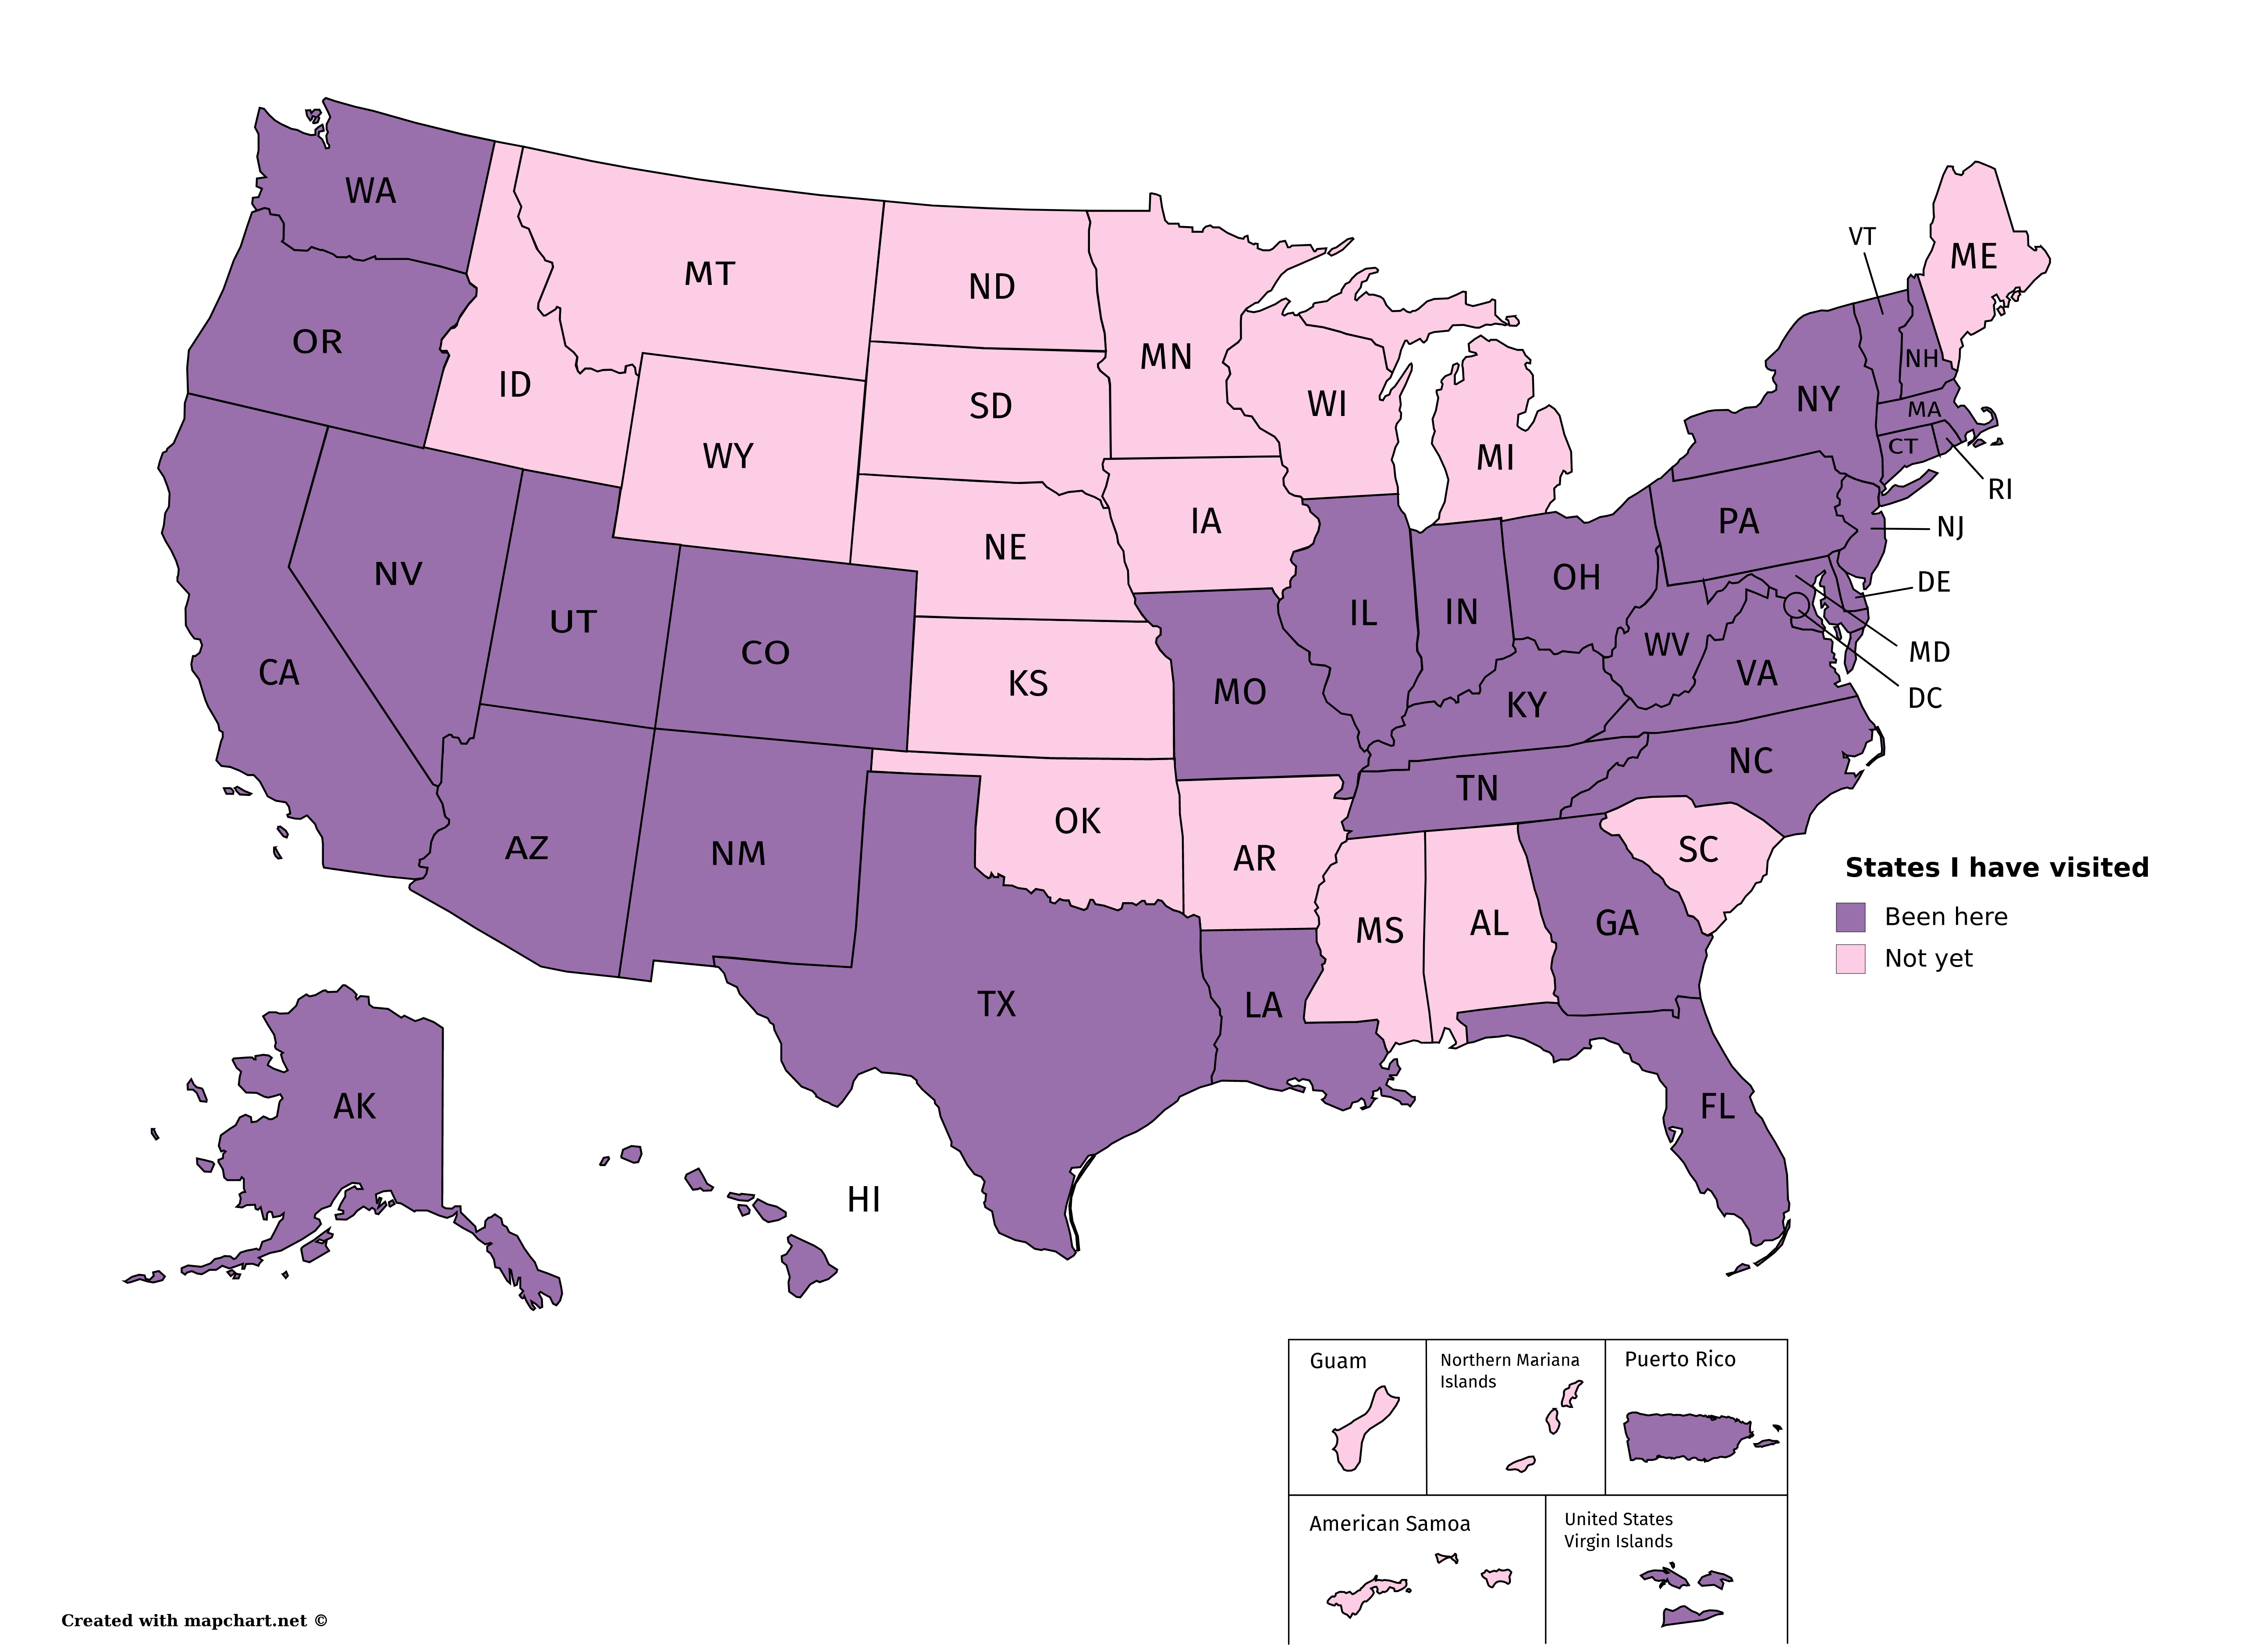 Map of
the U.S. with states I have visited colored purple, states not yet
visited are pink.  The pink states are in a large connected area
covering most of the Great Plains and upper Midwest, down to Oklahoma,
and then east across the deep South, minus Georgia.  Plus Maine.